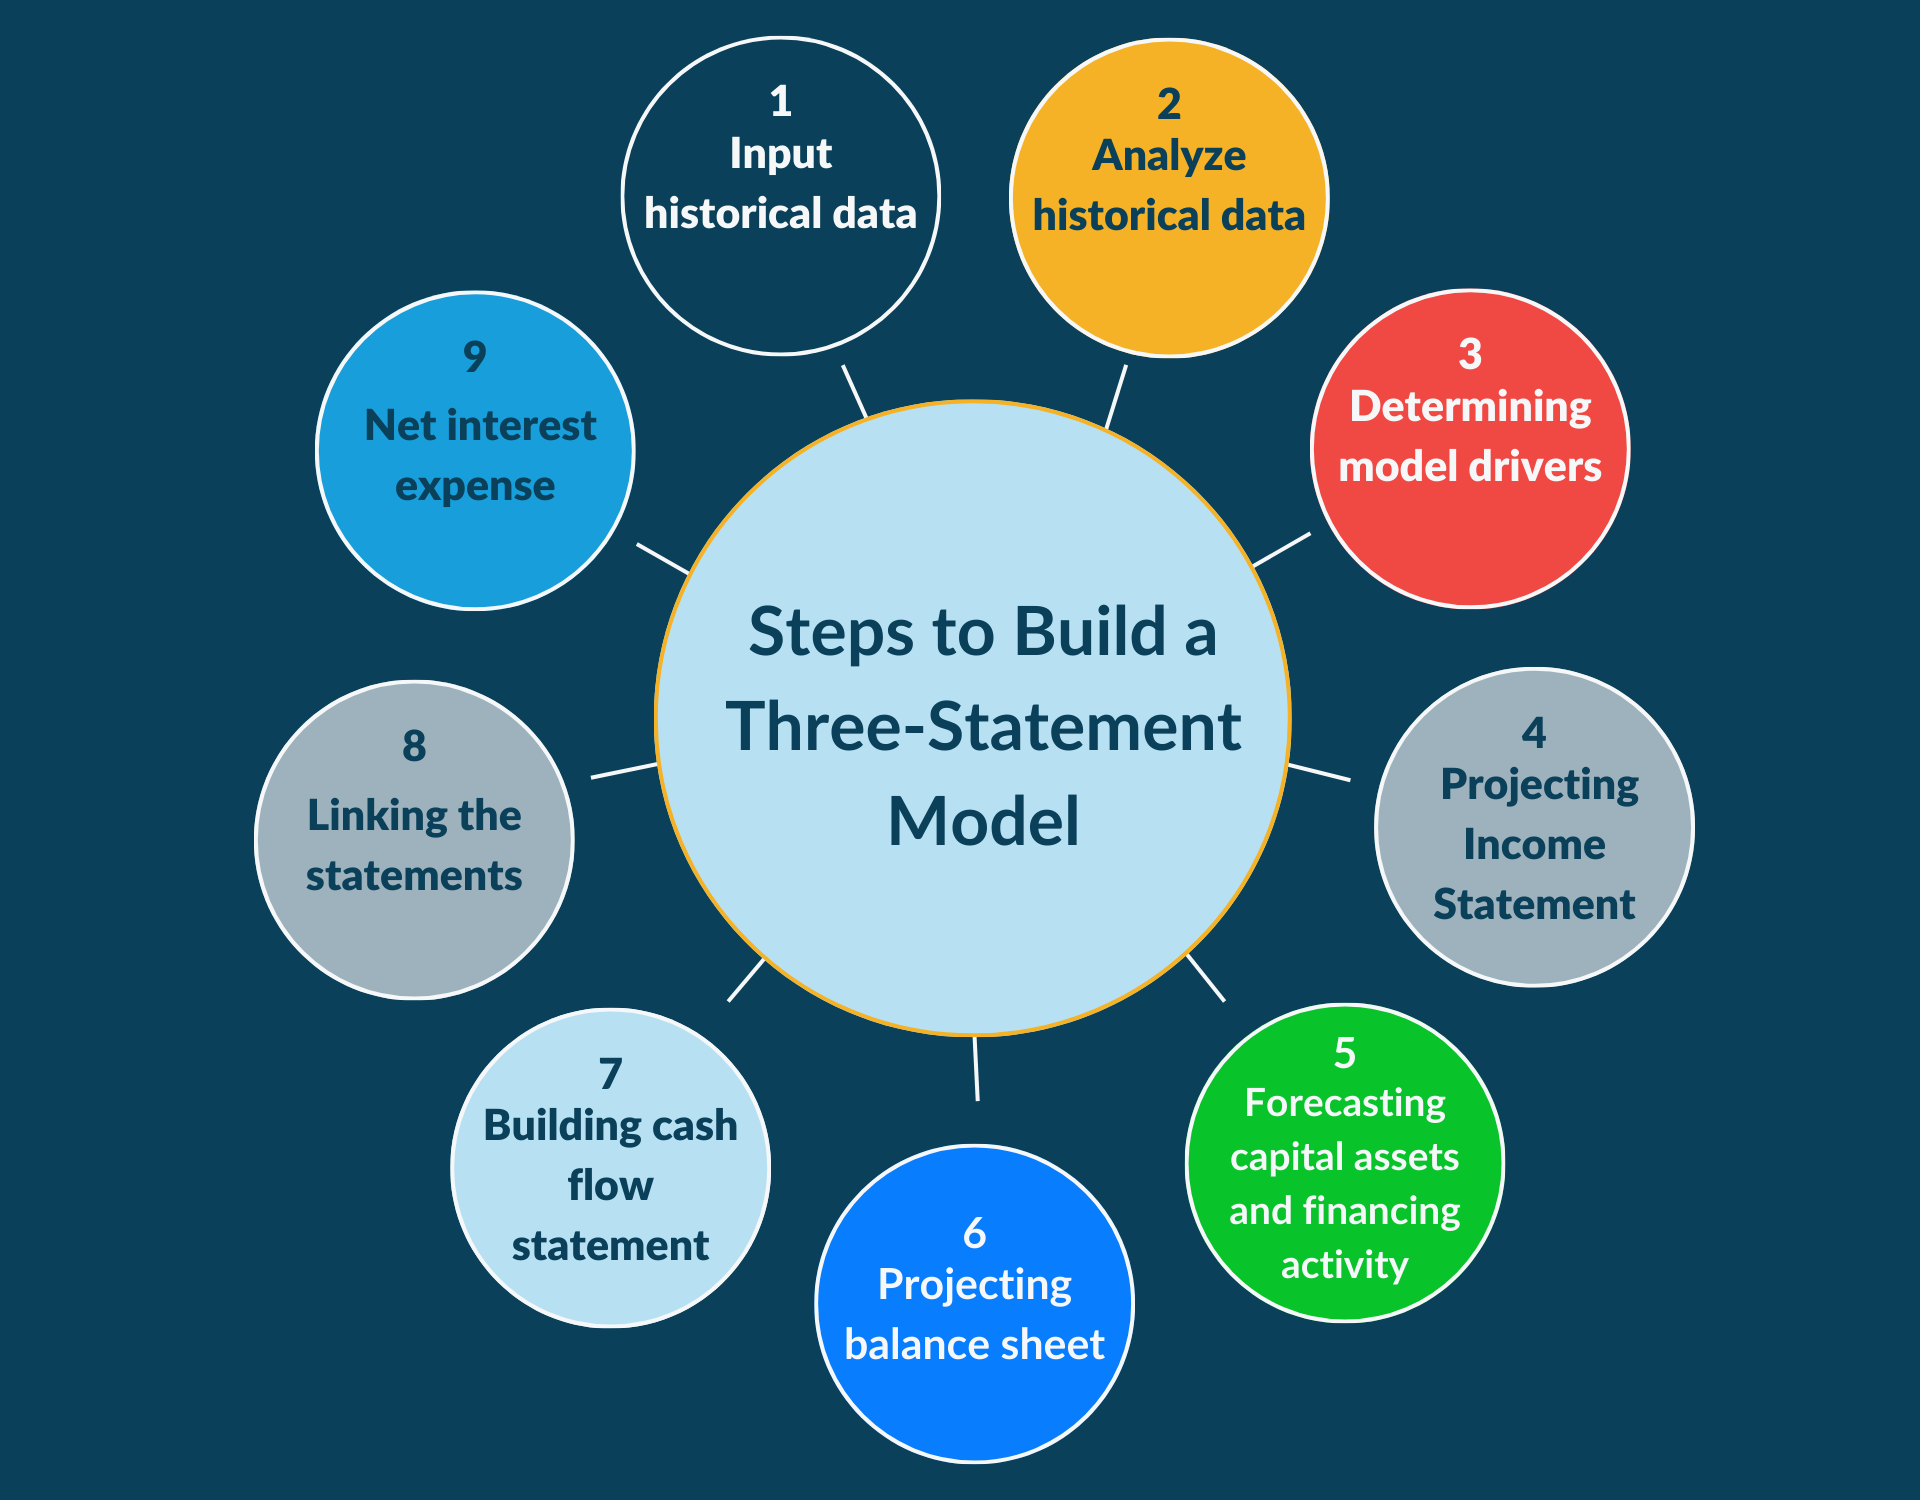 Steps to Build a Three-Statement Model